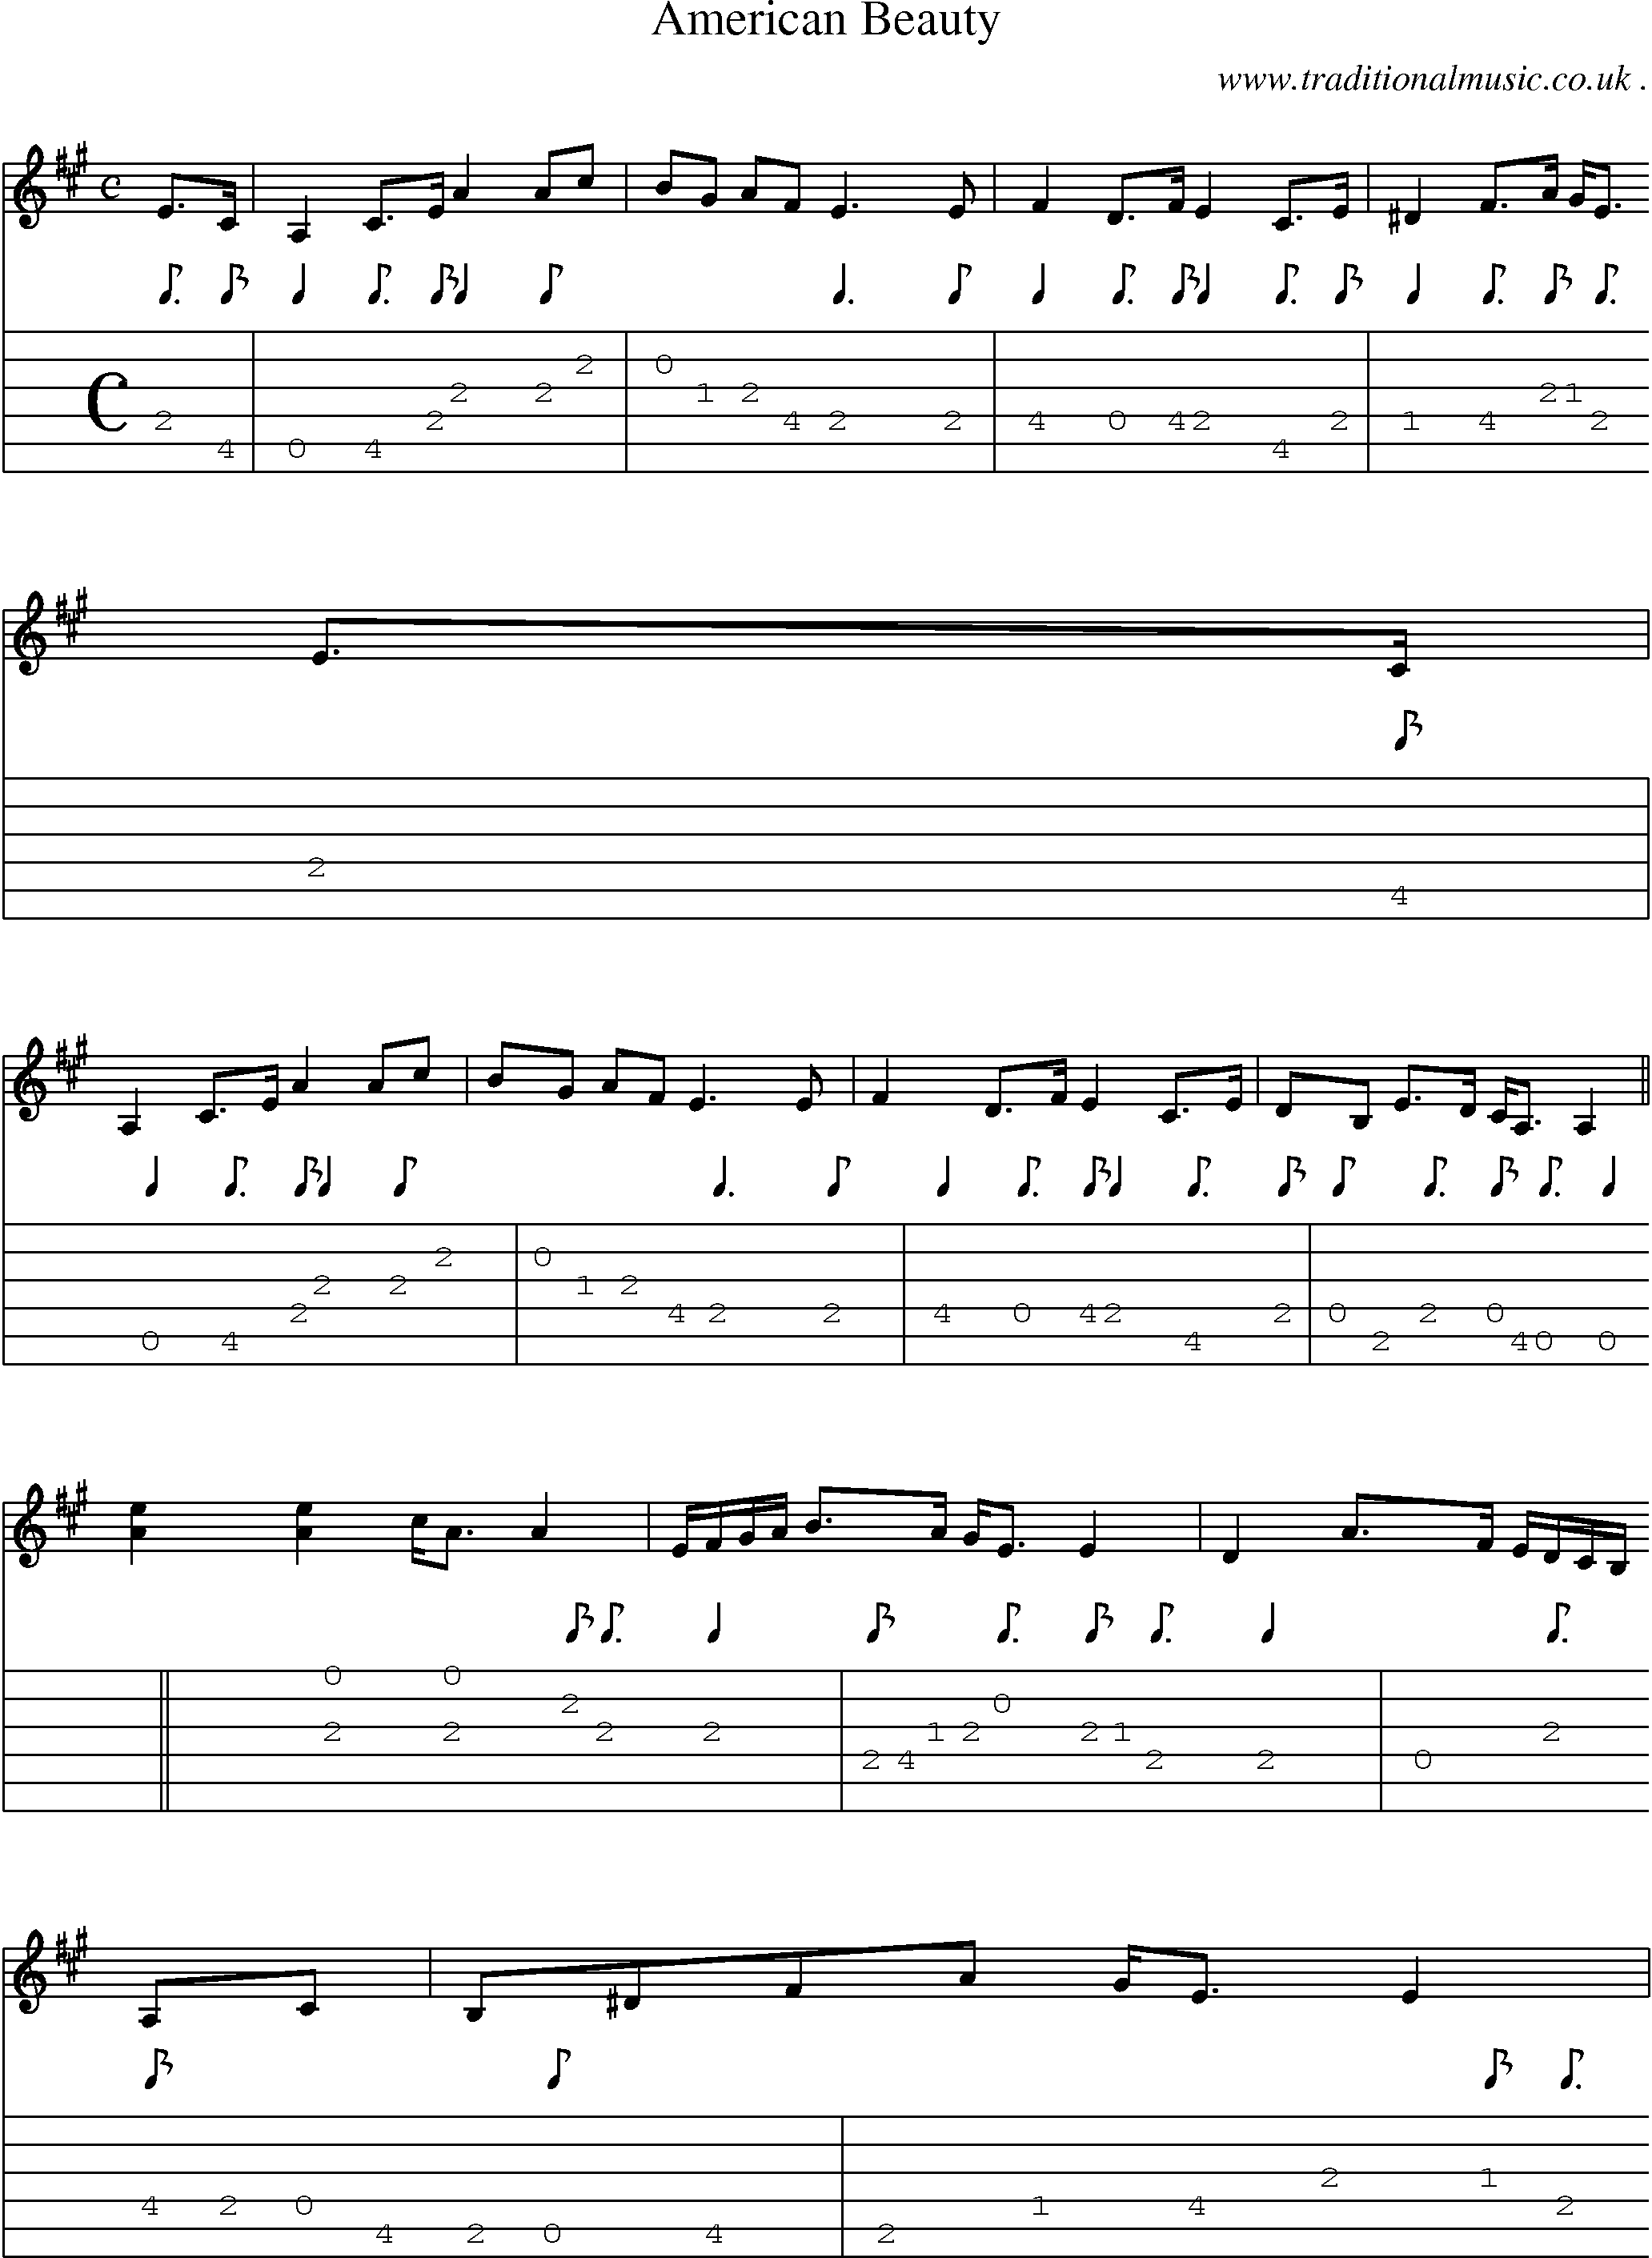 Sheet-music  score, Chords and Guitar Tabs for American Beauty